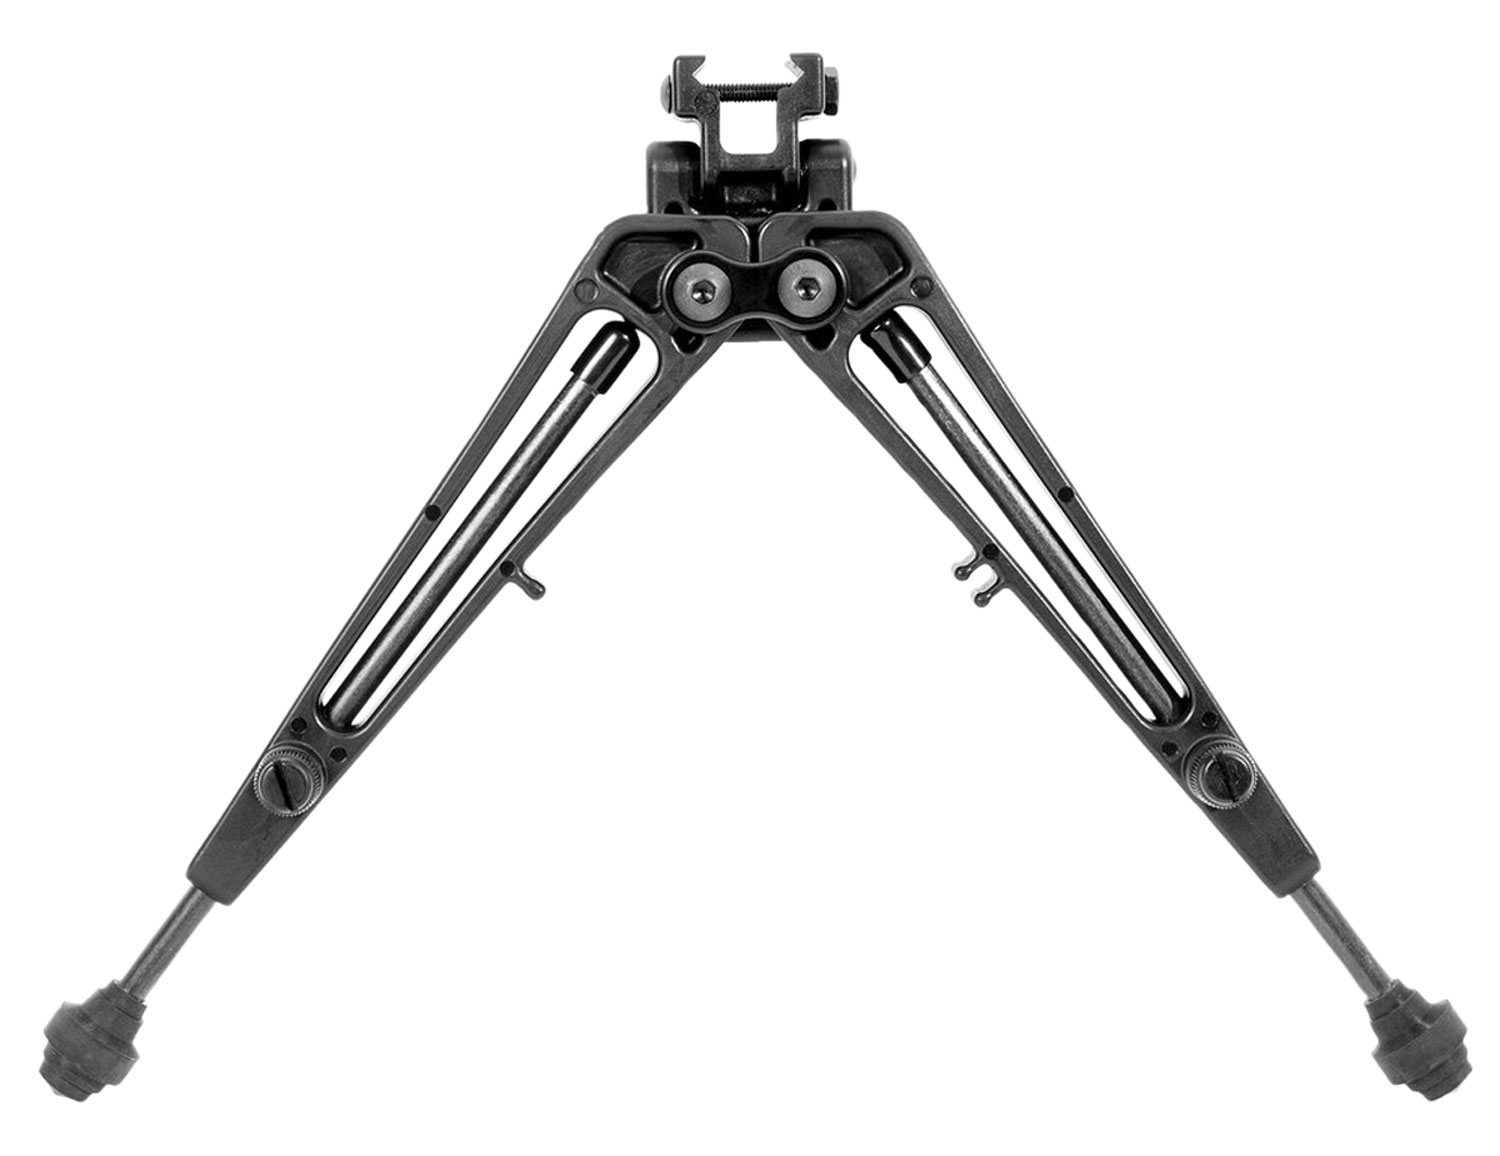 Limbsaver 12601 True-Track Bipod made of Durable Isoplast with Black Finish, Rubber Feet, Sling Stud Attachment, 7-11